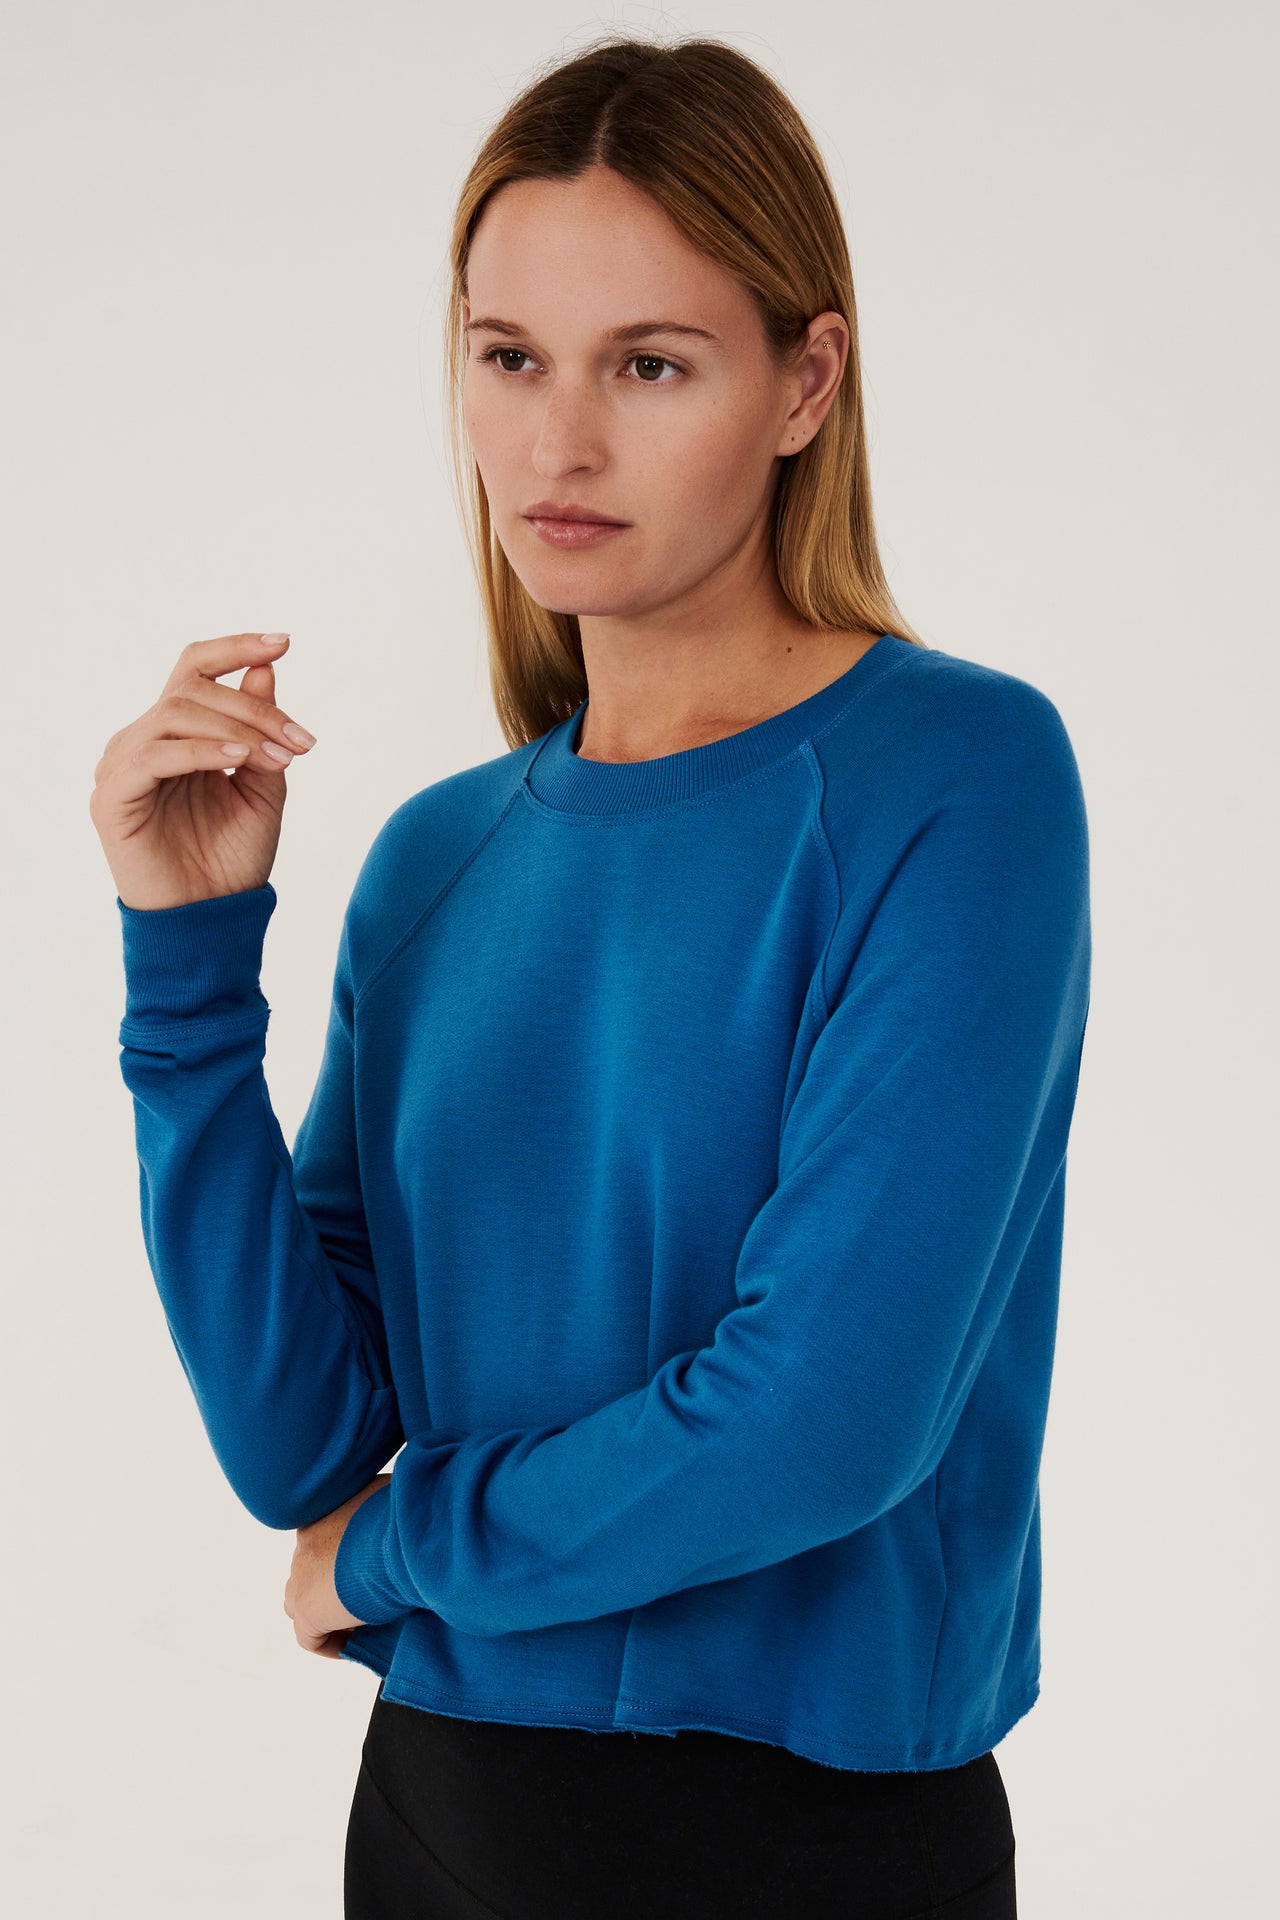 Front view of woman with dark blonde hair, wearing  bright cropped blue sweatshirt with black leggings